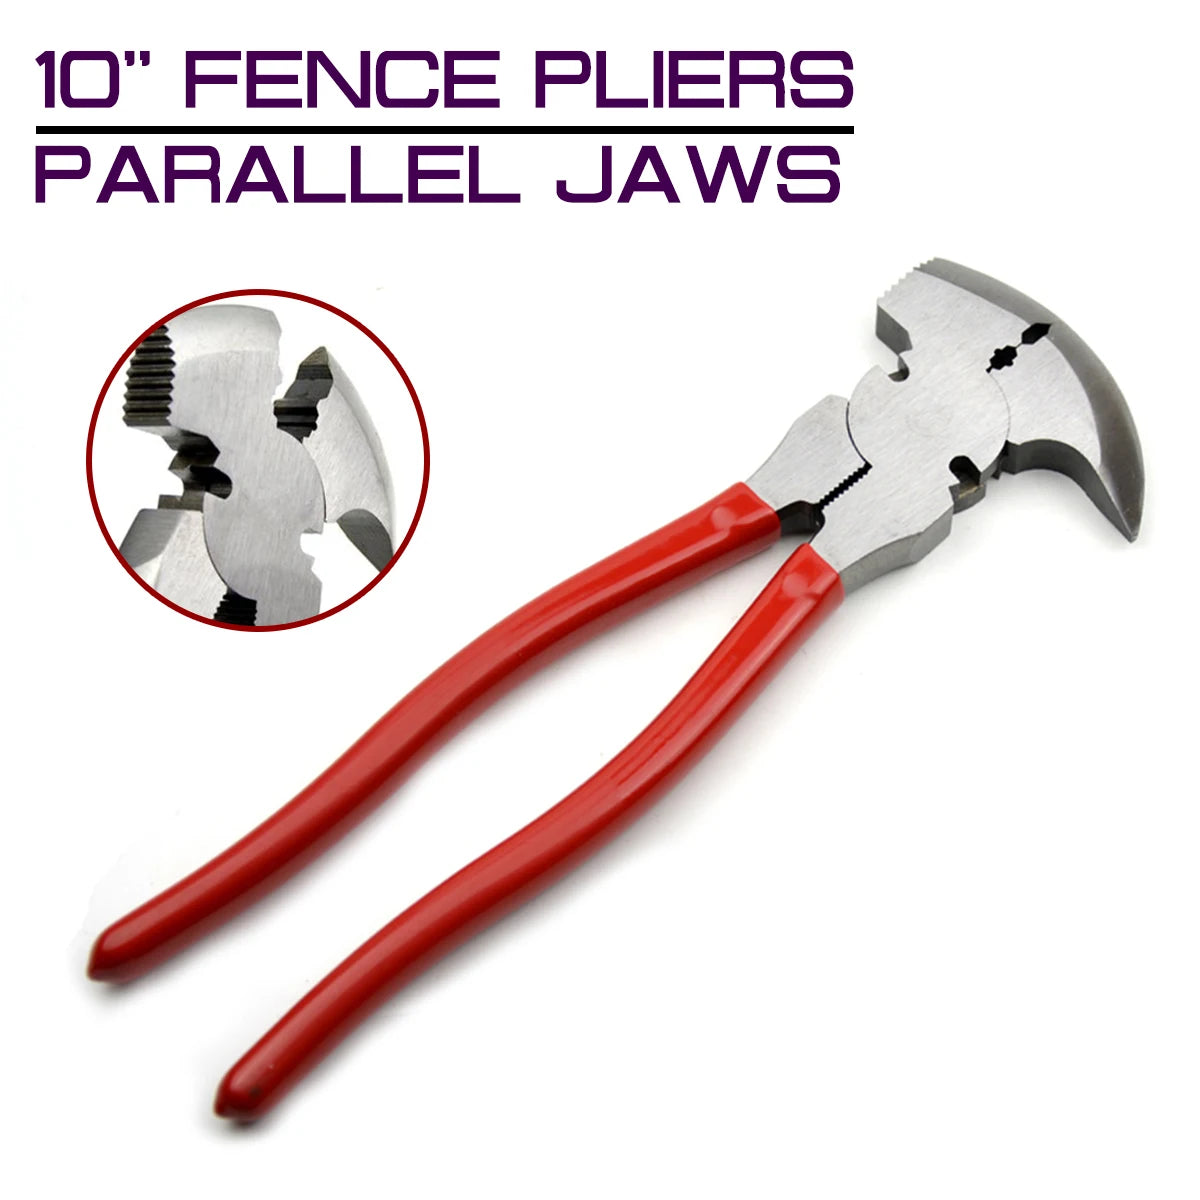 Fence Pliers 10in. Parallel Jaws